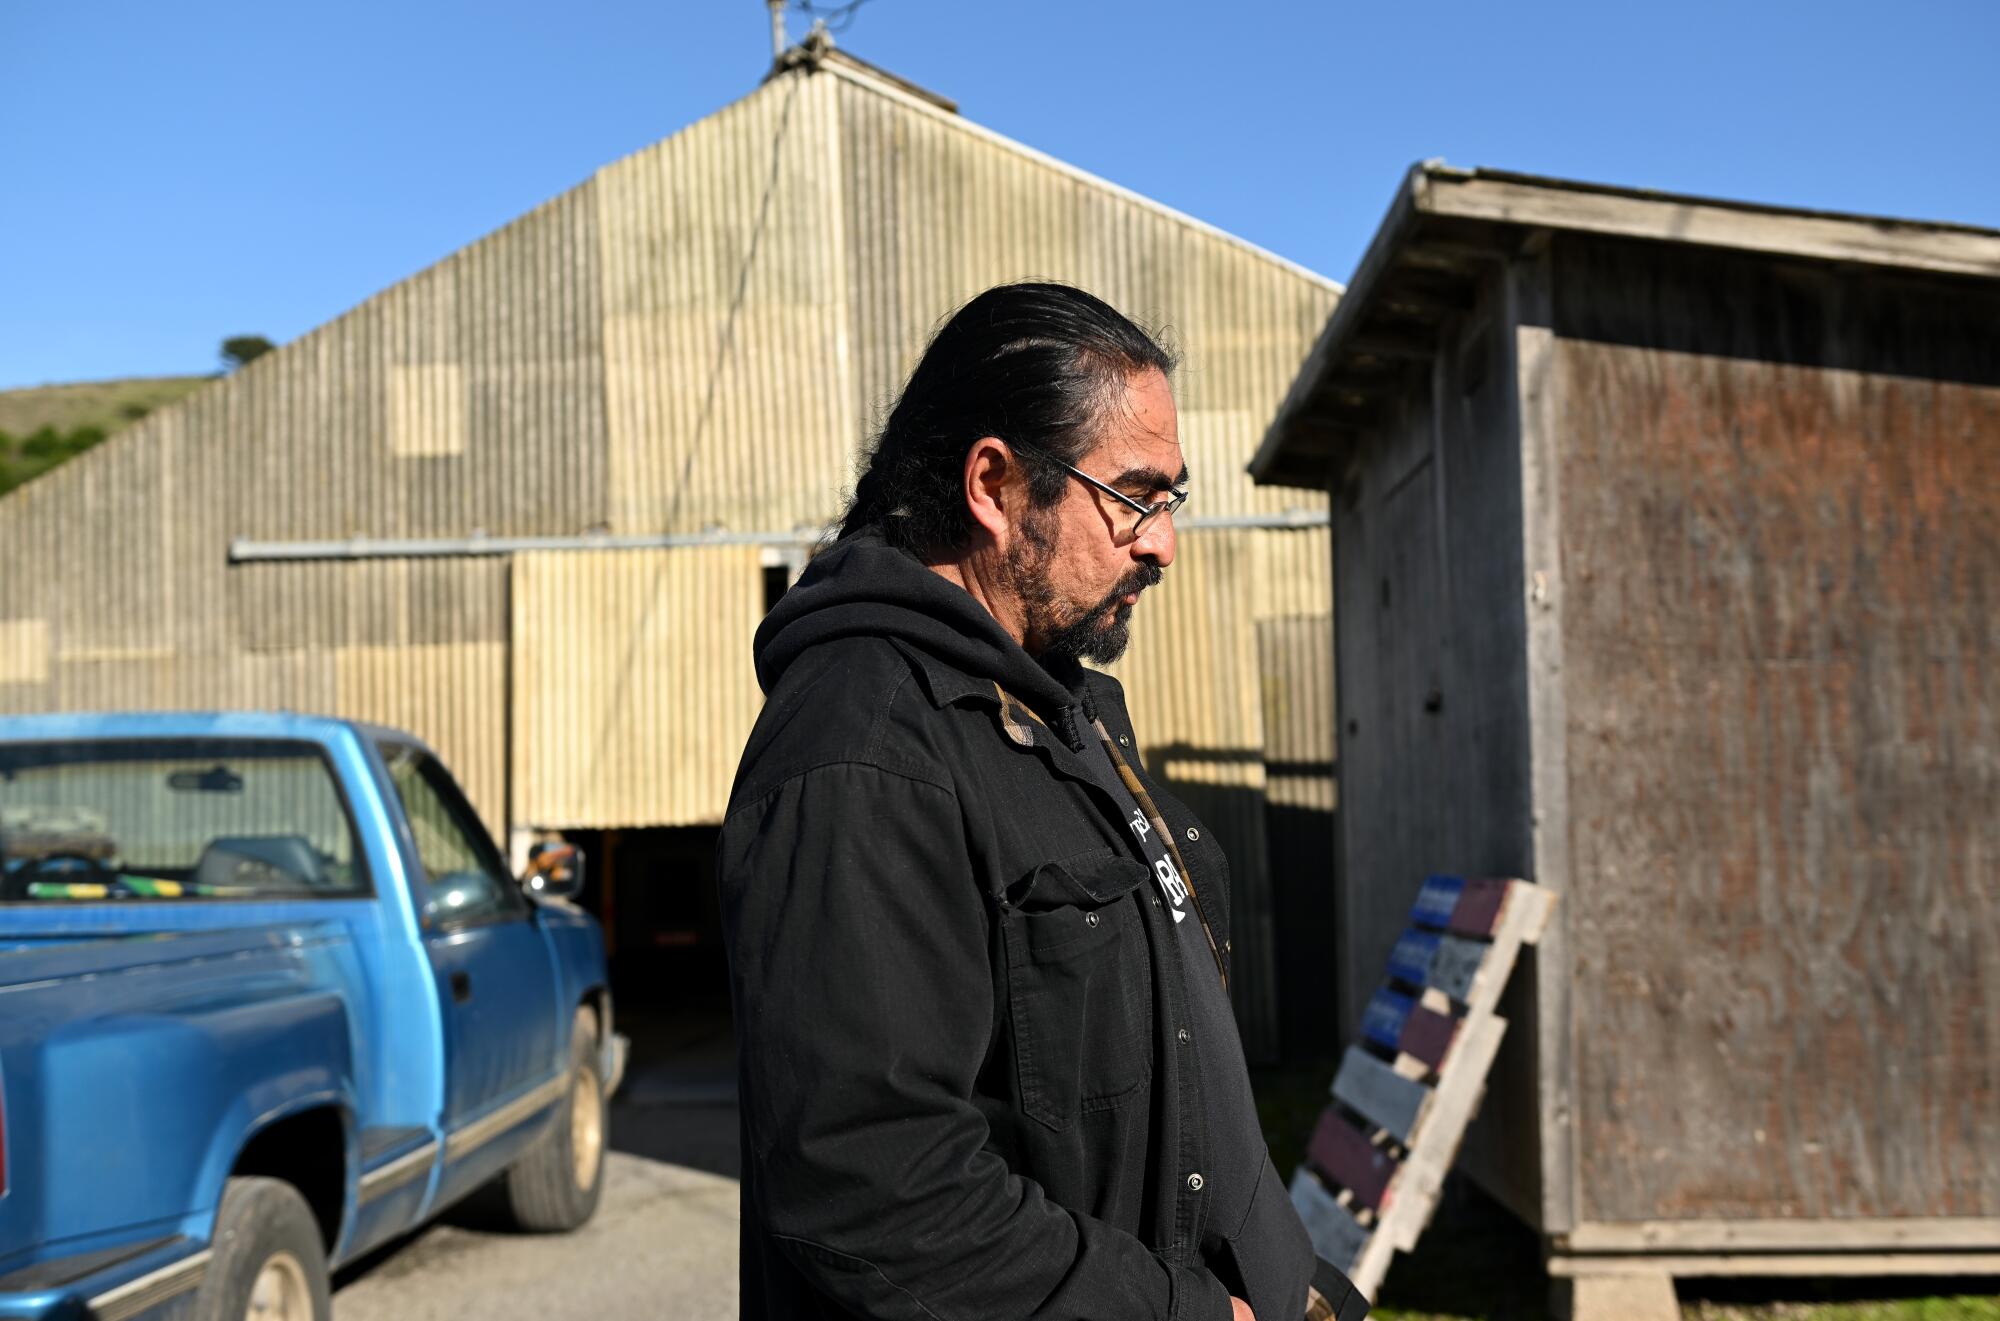 A man stands near a blue pickup truck, a wooden shack and a larger building with a metal roof